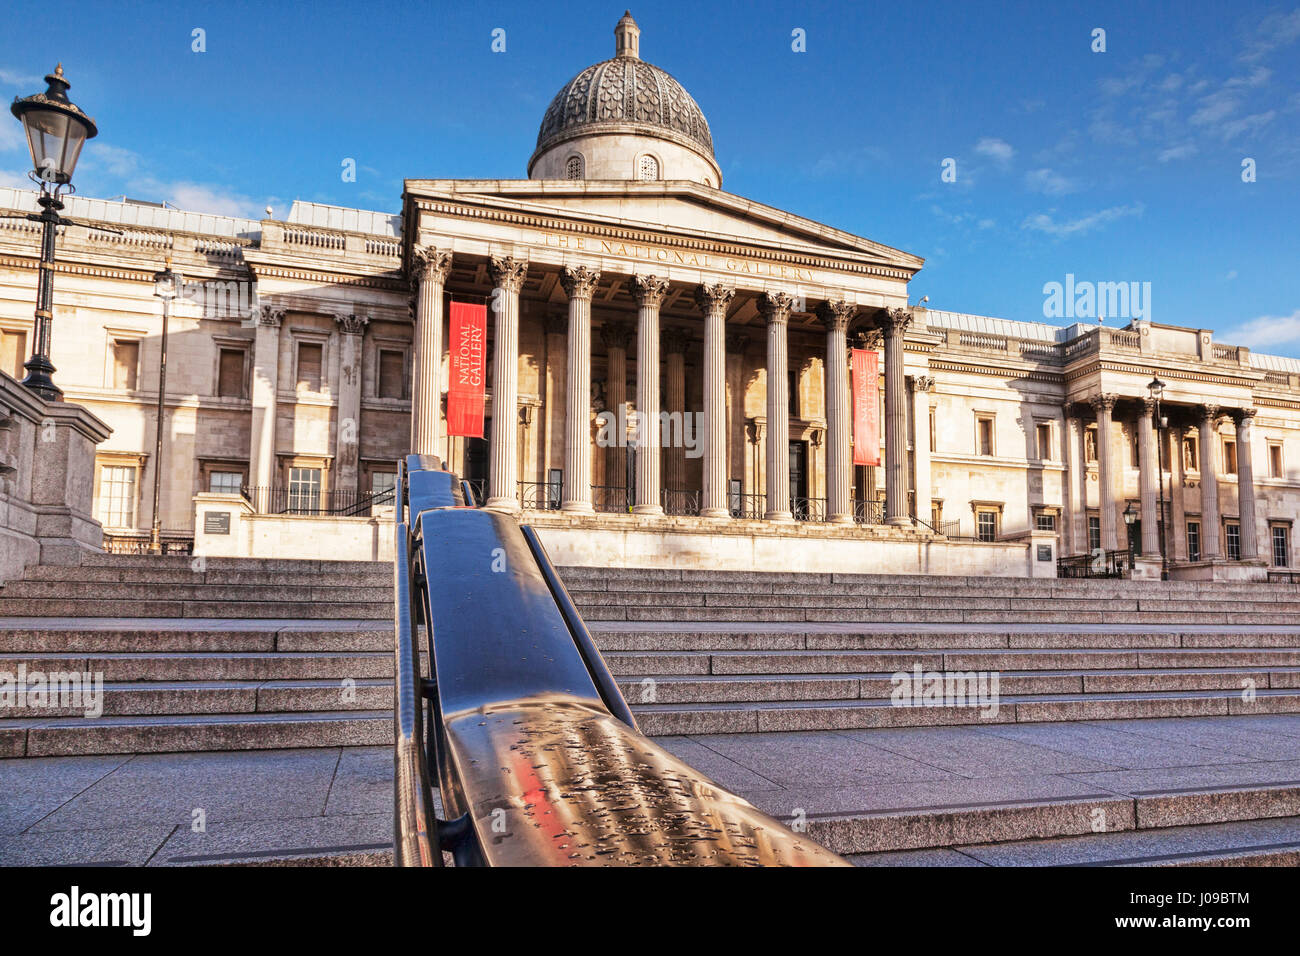 National Gallery, Trafalgar Square, Londres, Angleterre, Royaume-Uni Banque D'Images